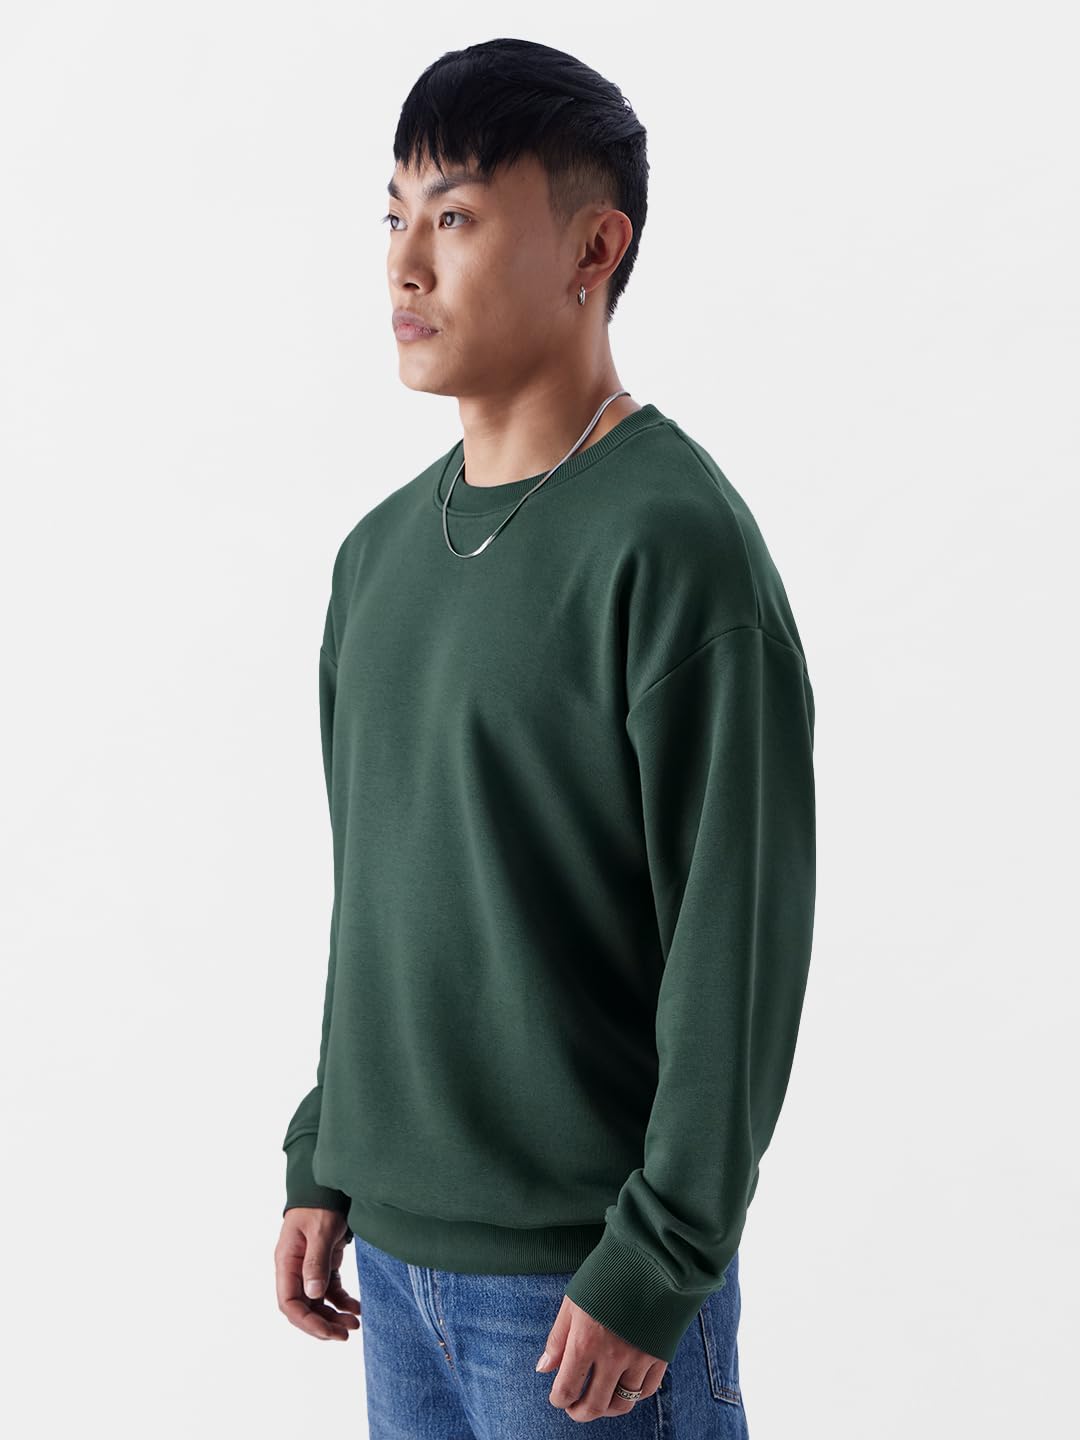 The Souled Store Solids: Bottle Green Men Oversized Sweatshirts Sweatshirts Hoodies Pullovers Crewneck Hooded Zip-Up Graphic Printed Solid Color Block Sportswear Casual Warm Cozy Comfortable Winter